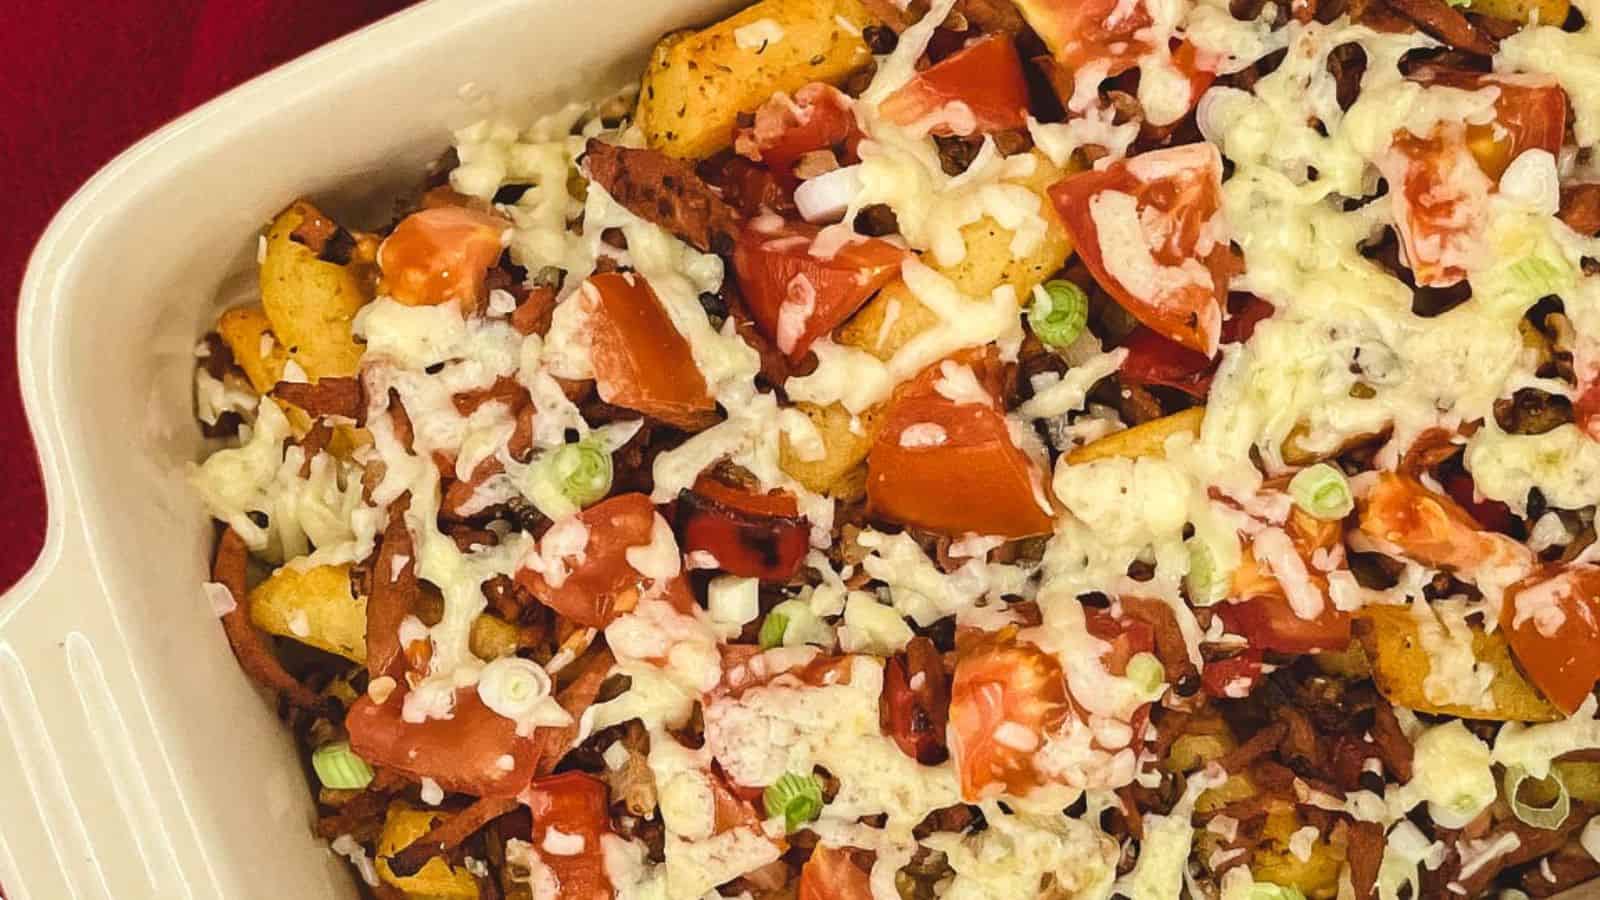 Dirty fries in an ovenproof dish.